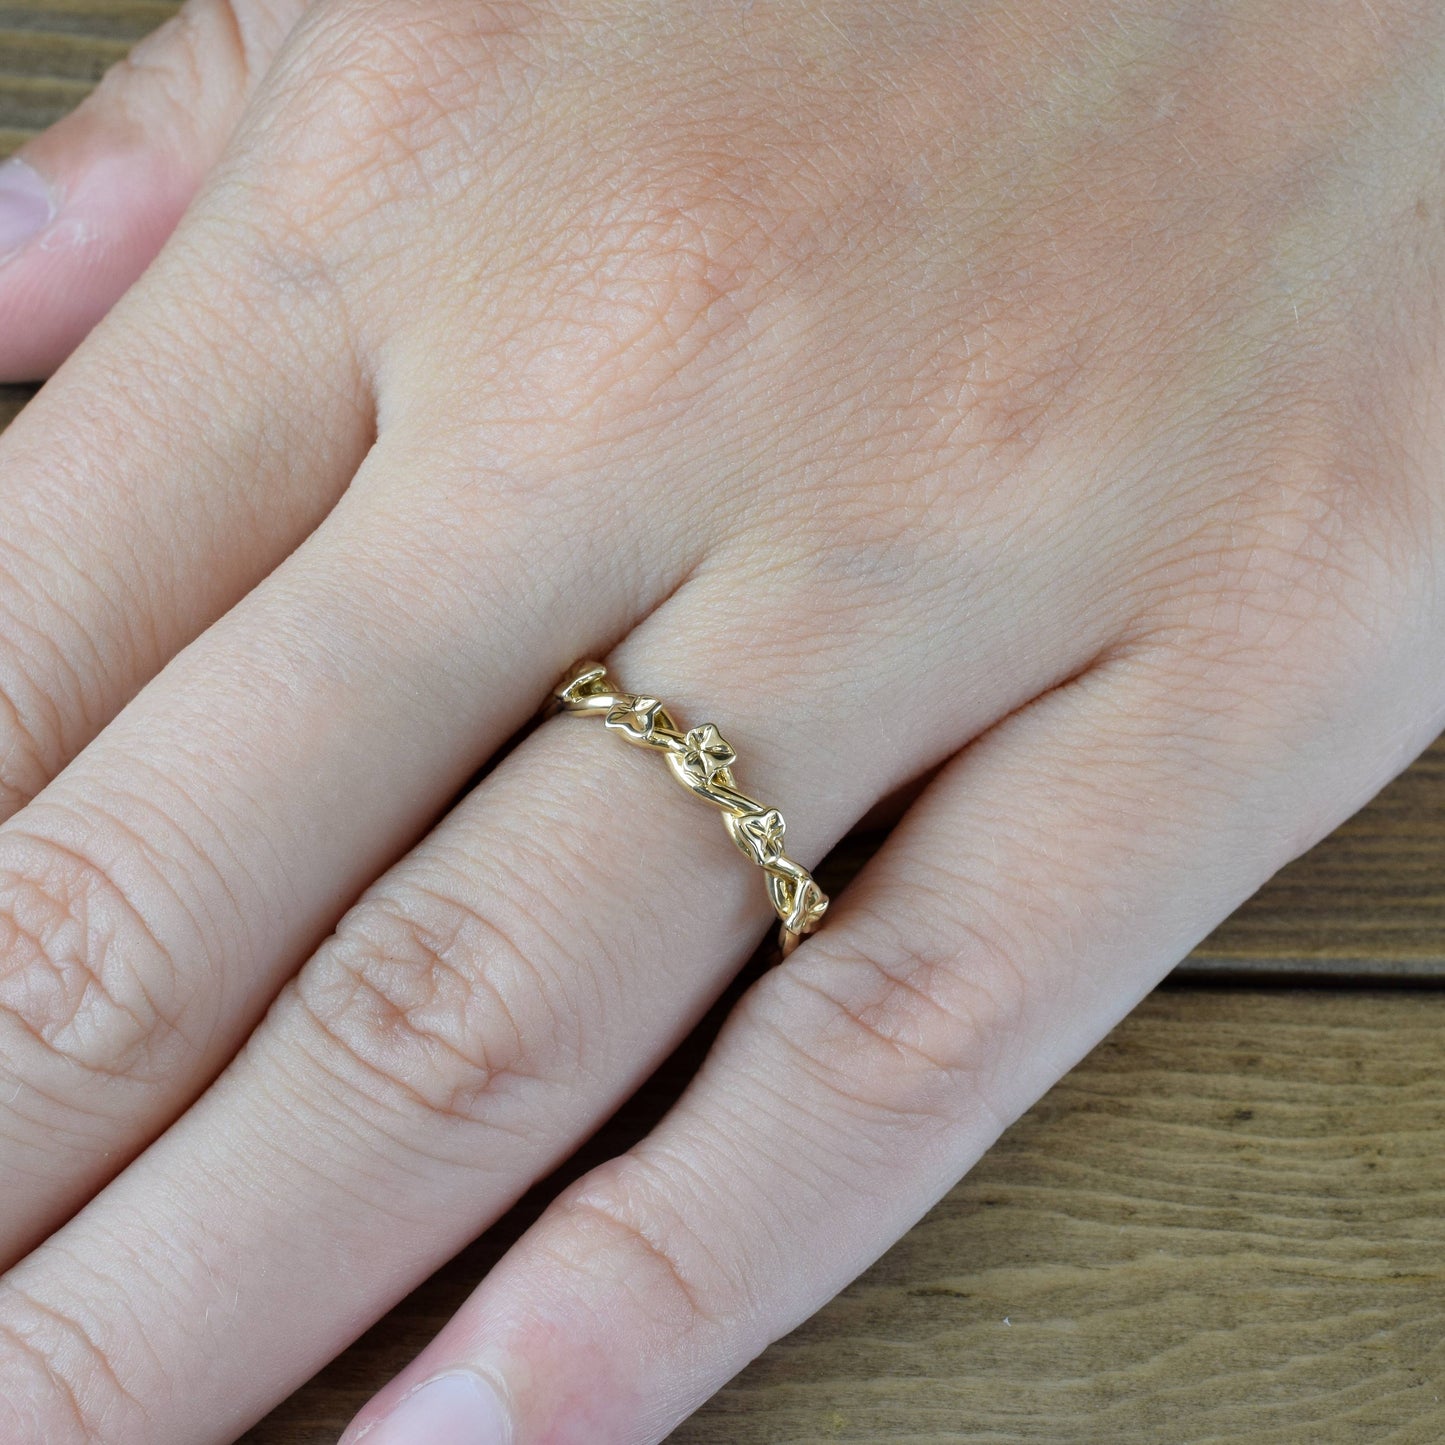 intertwined ivy vine ring in yellow gold on finger